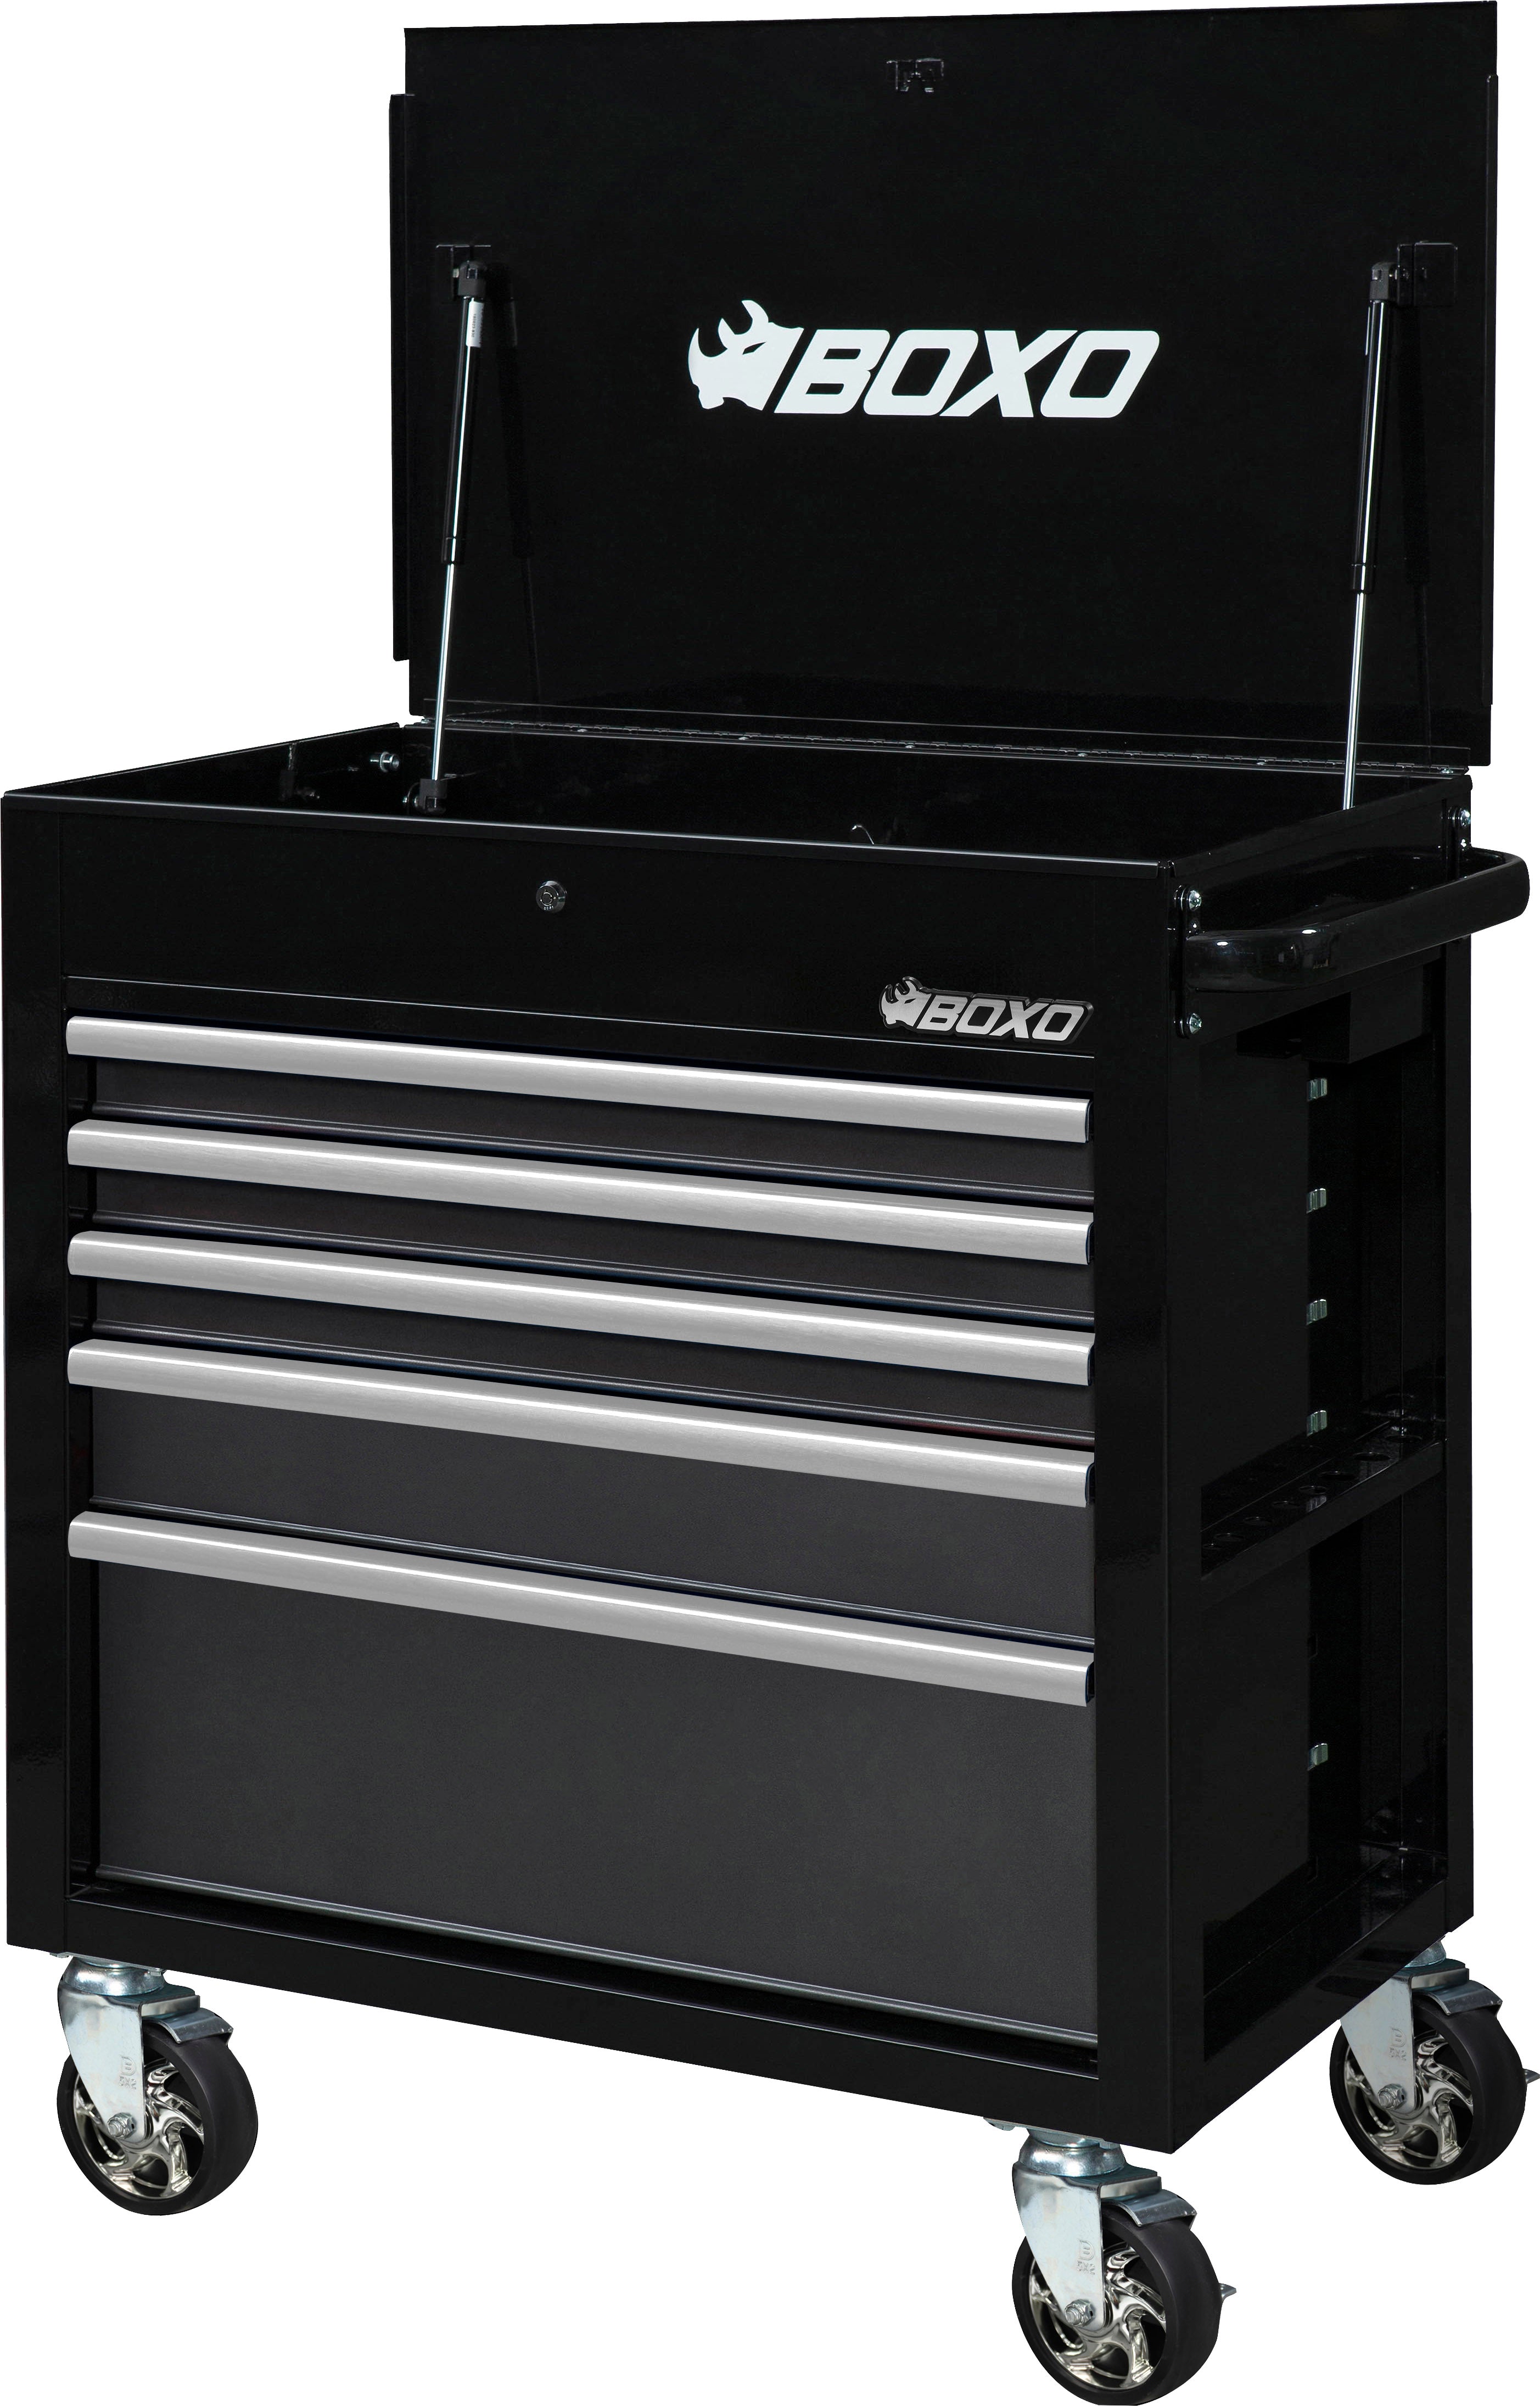 BOXO 34" 5 Drawer Open Top Service Cart with Drawer Trim Pack - Black Body & Trim Colour options